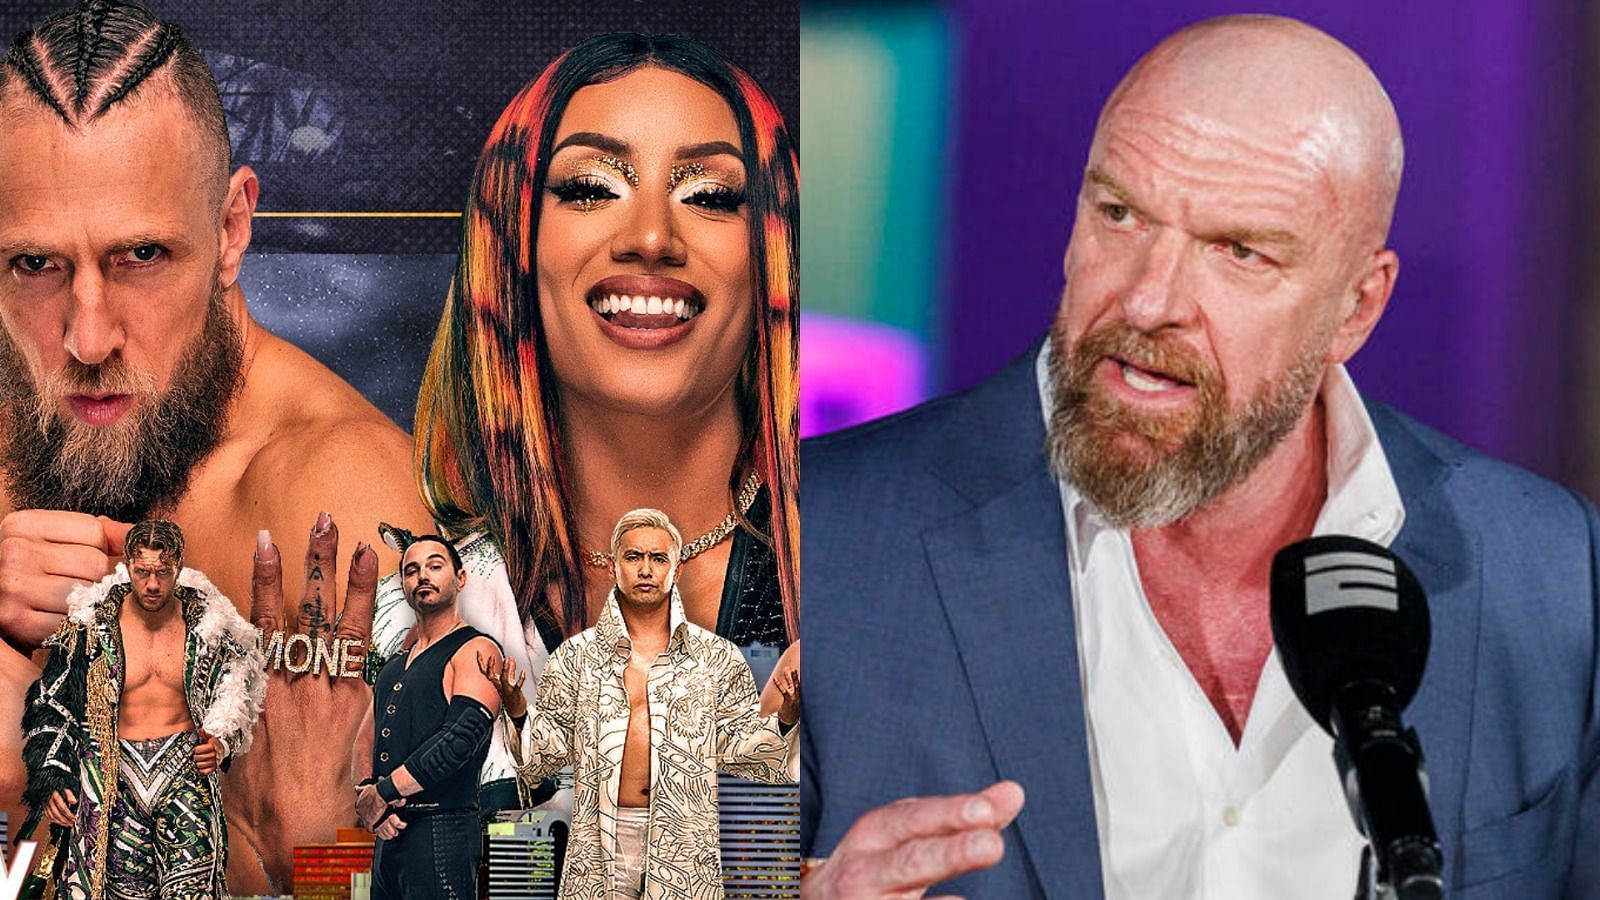 AEW and WWE are rival companies [Images via AEW and WWE websites]